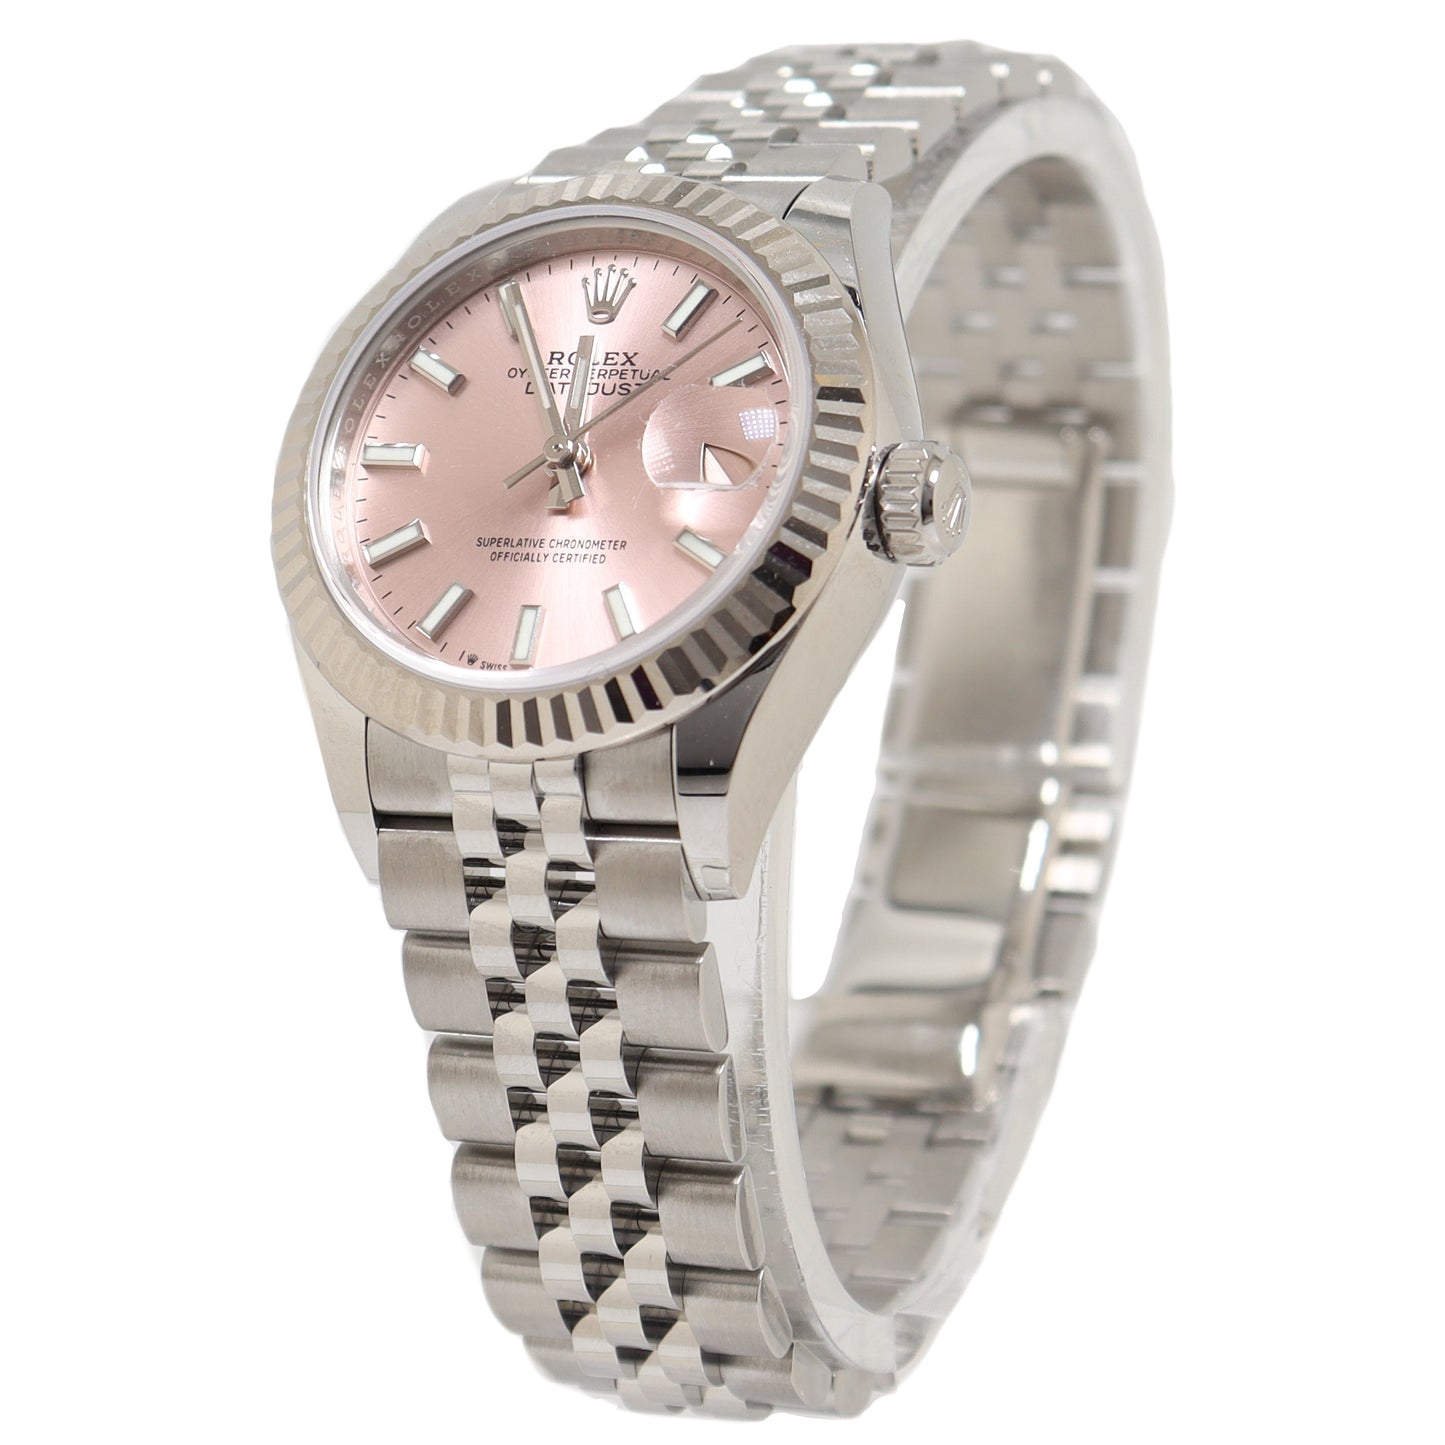 Load image into Gallery viewer, Rolex Ladies Datejust Stainless Steel 28mm Pink Stick Dial Watch Reference# 279174 - Happy Jewelers Fine Jewelry Lifetime Warranty
